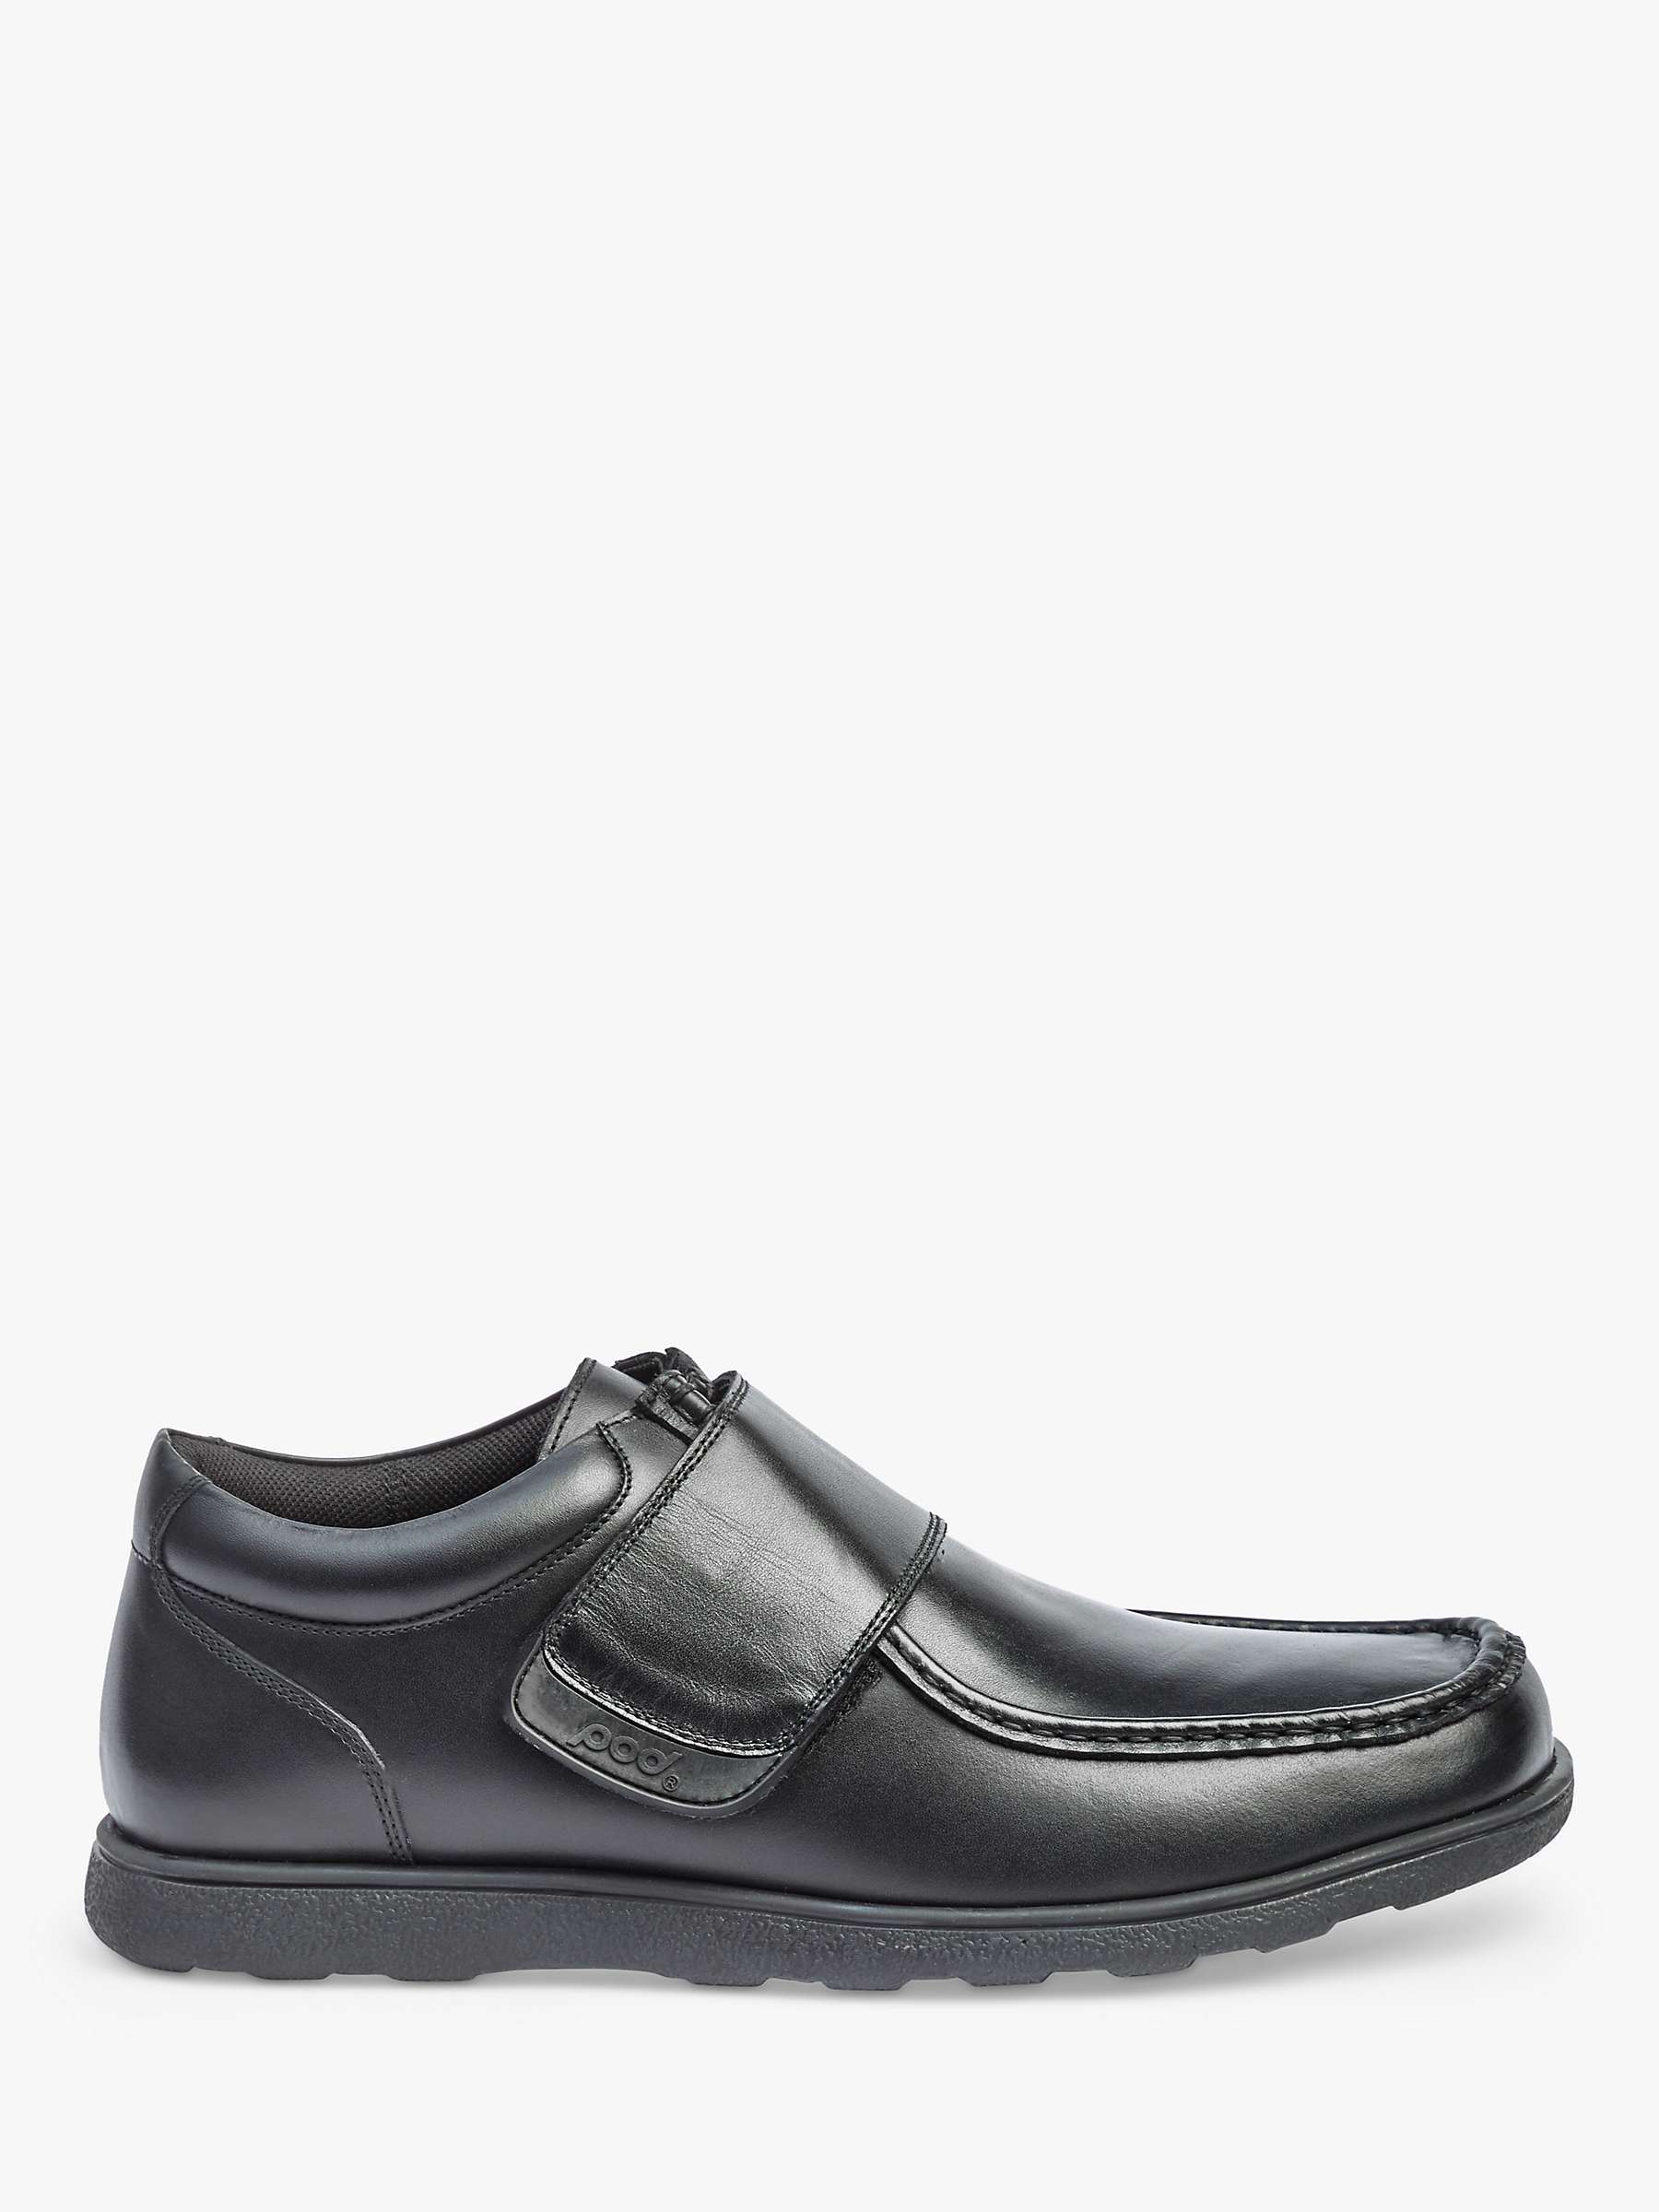 Pod Malcome Leather Moccasin Shoes, Black at John Lewis & Partners